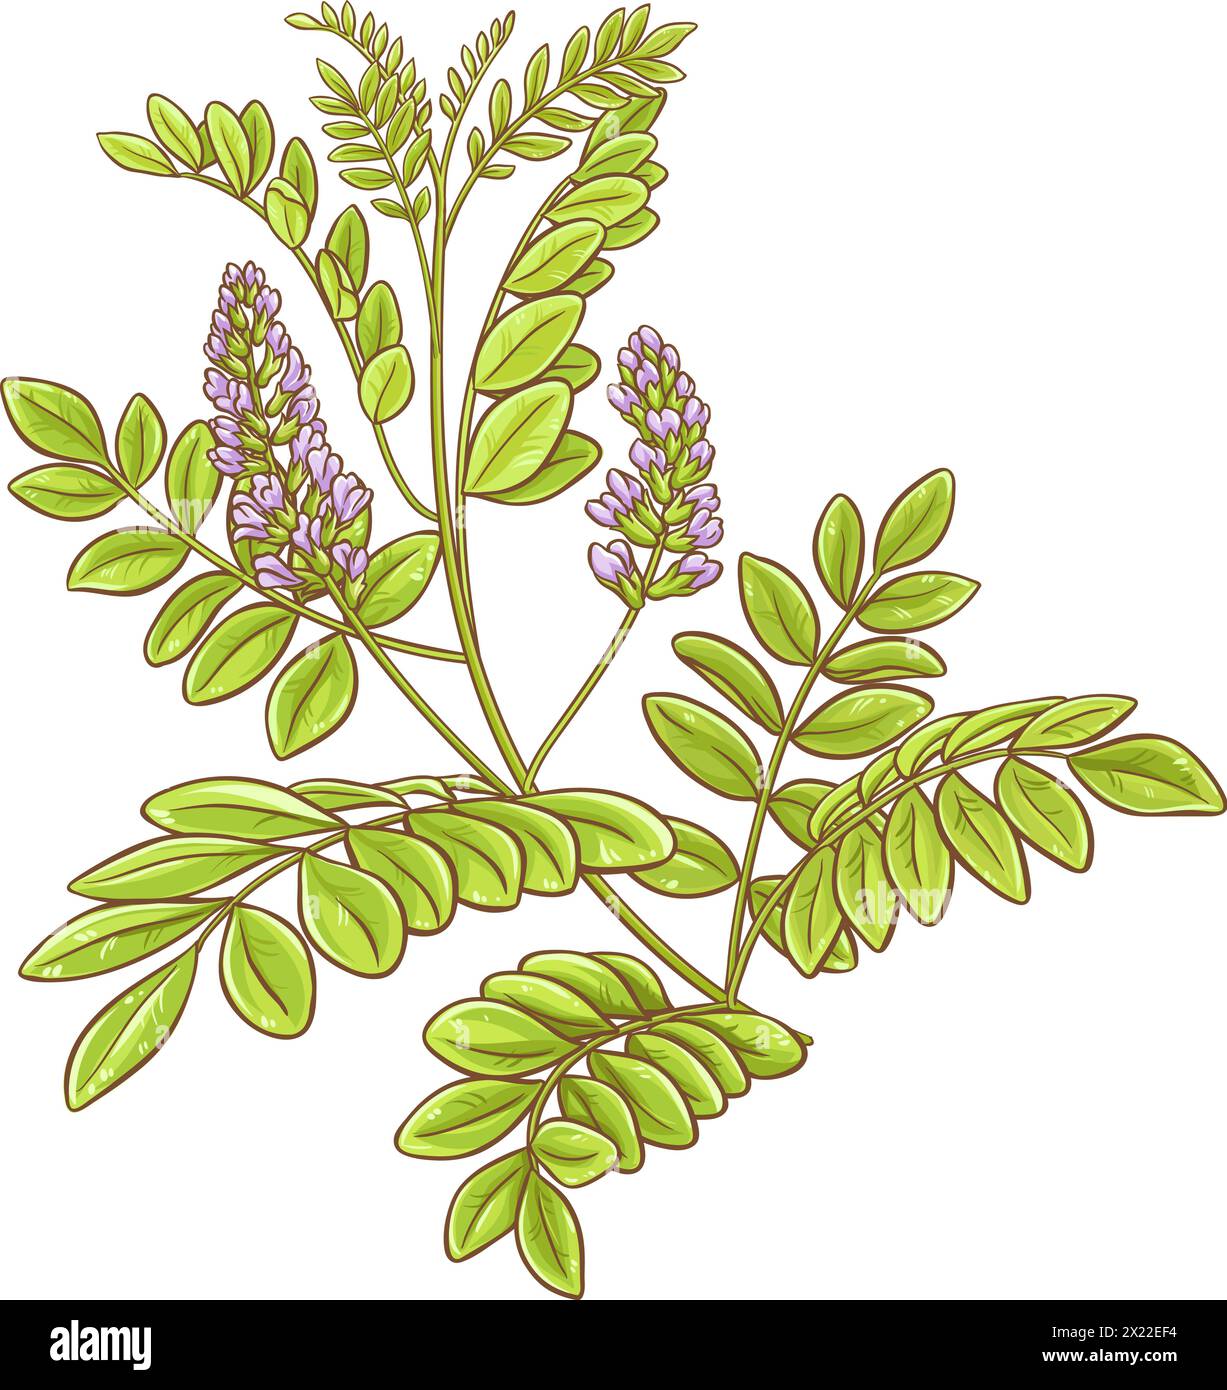 Licorice Plant Colored Detailed Illustration Stock Vector